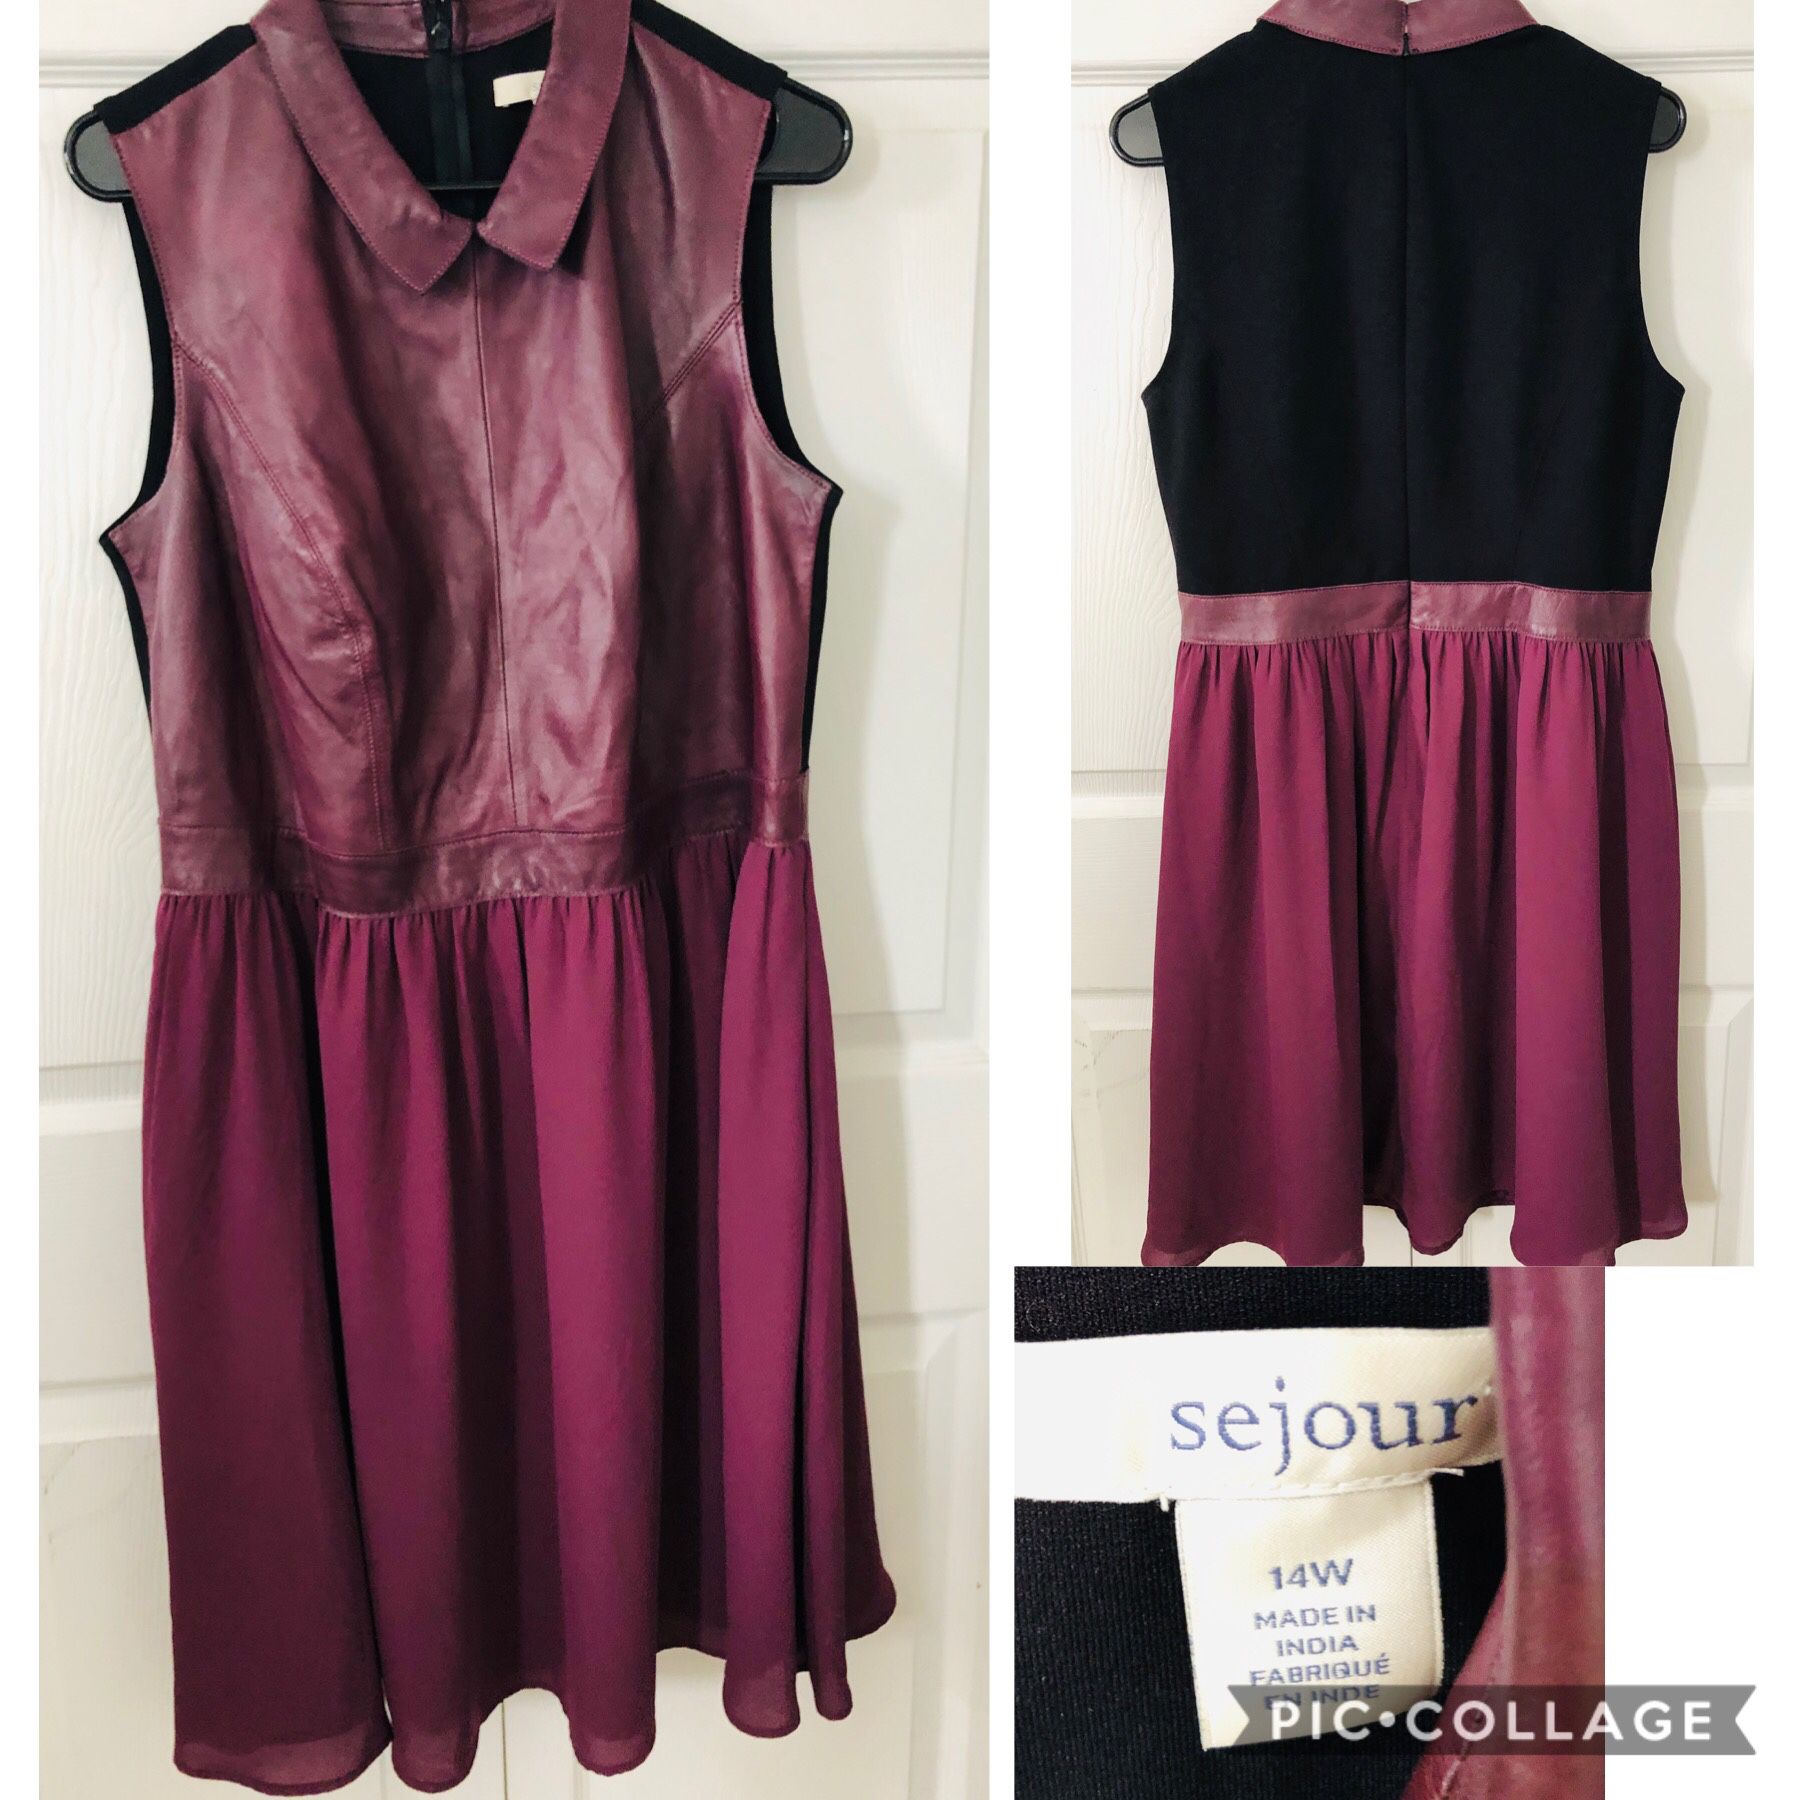 Sejour Lamb LEATHER Fit Flare Dress 14W Plum/Black in good condition (pick up only)